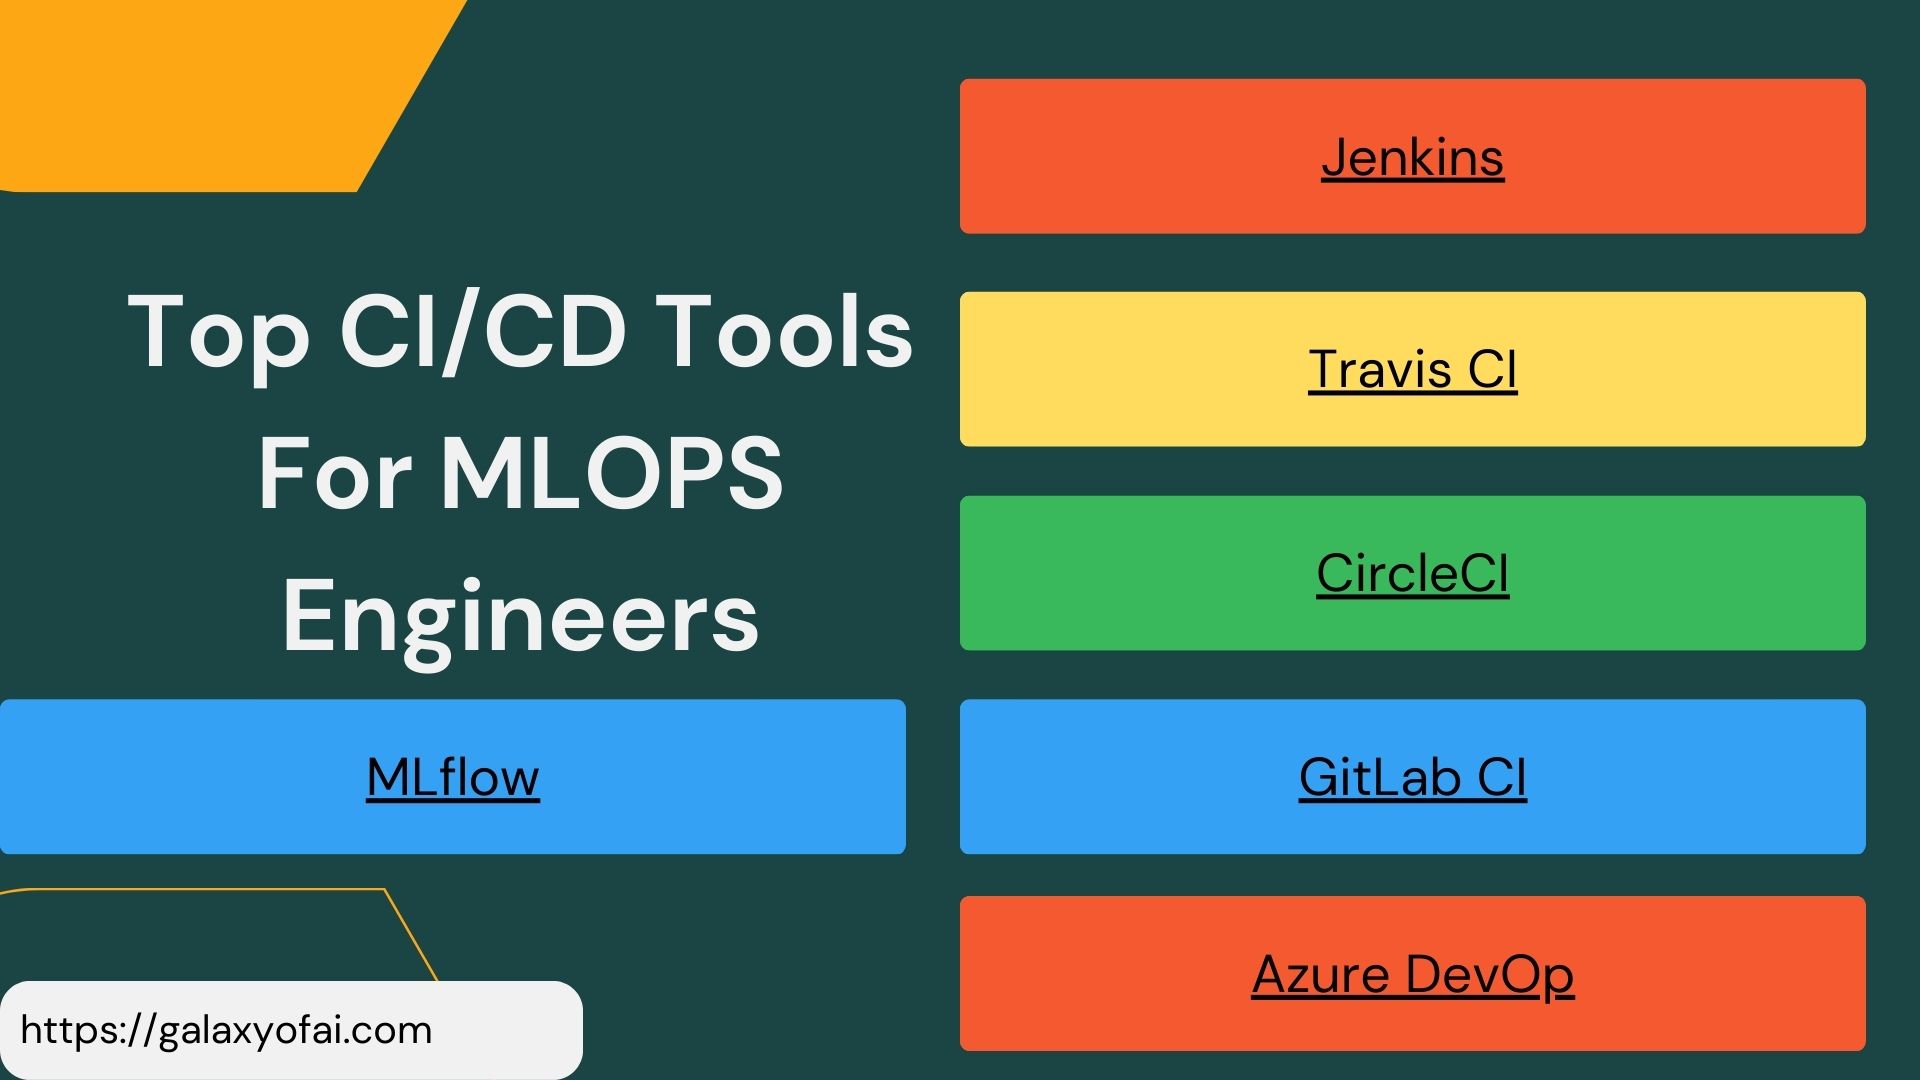 Top CI/CD Tools for MLOPS Engineers